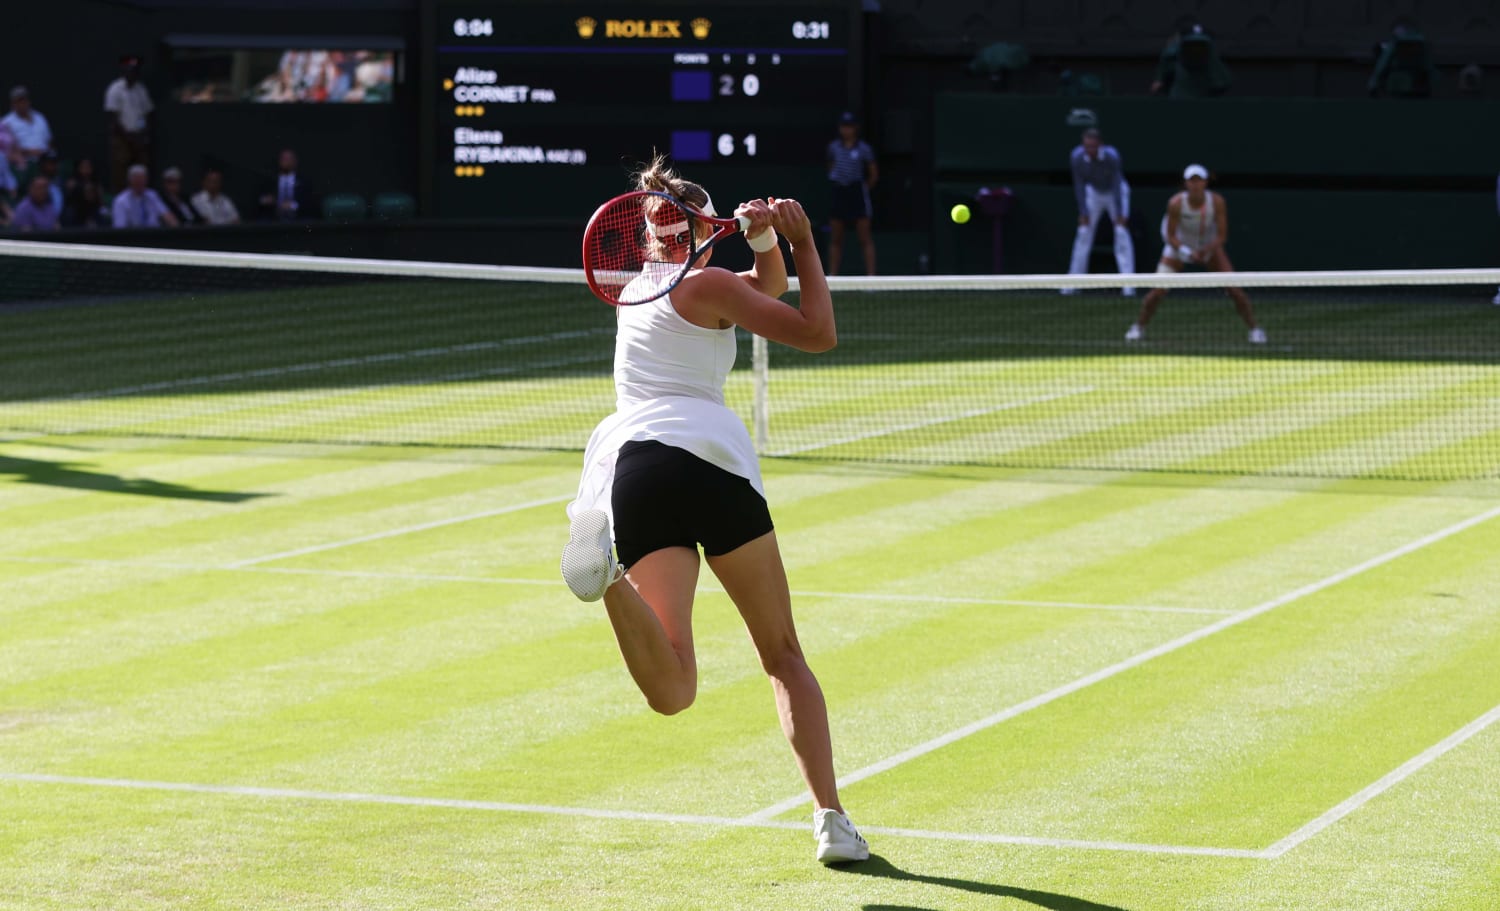 Womens sporting uniforms at Wimbledon and world cup to change